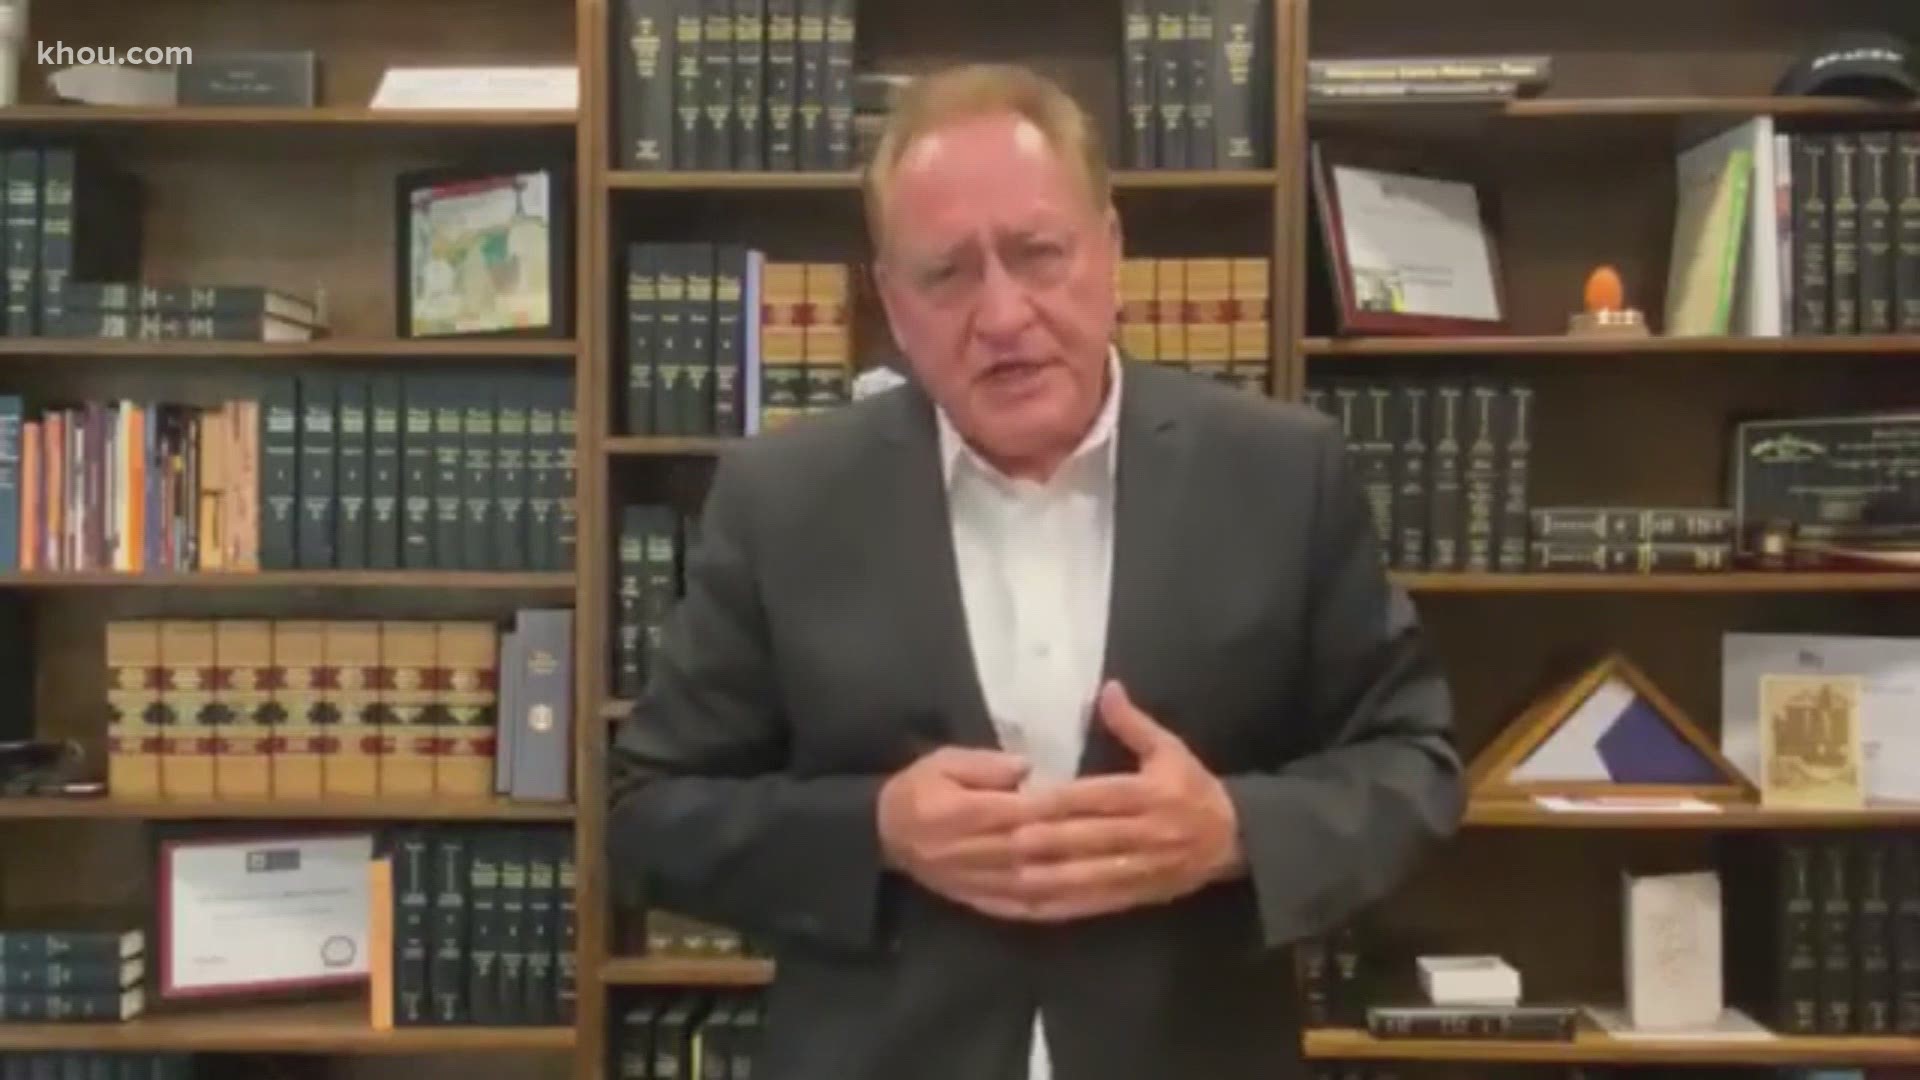 In a viral video on Facebook, Judge Mark Keough lays out his reasons for why he believes it's safe to reopen the state.